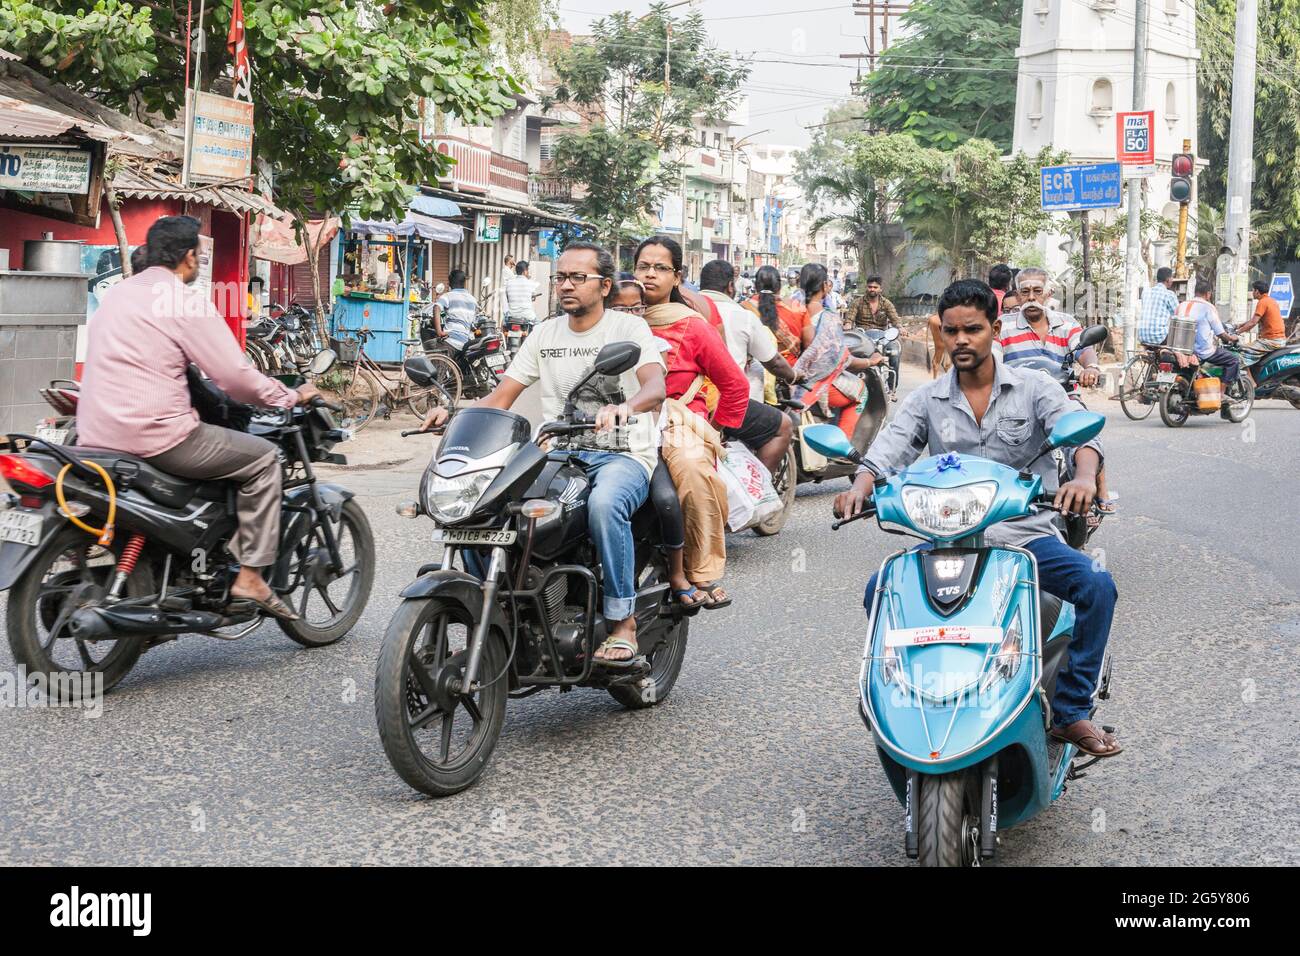 Indian males drive scooters and motorbikes during rush hour without crash helmets in traffic, Puducherry (Pondicherry), Tamil Nadu, India Stock Photo